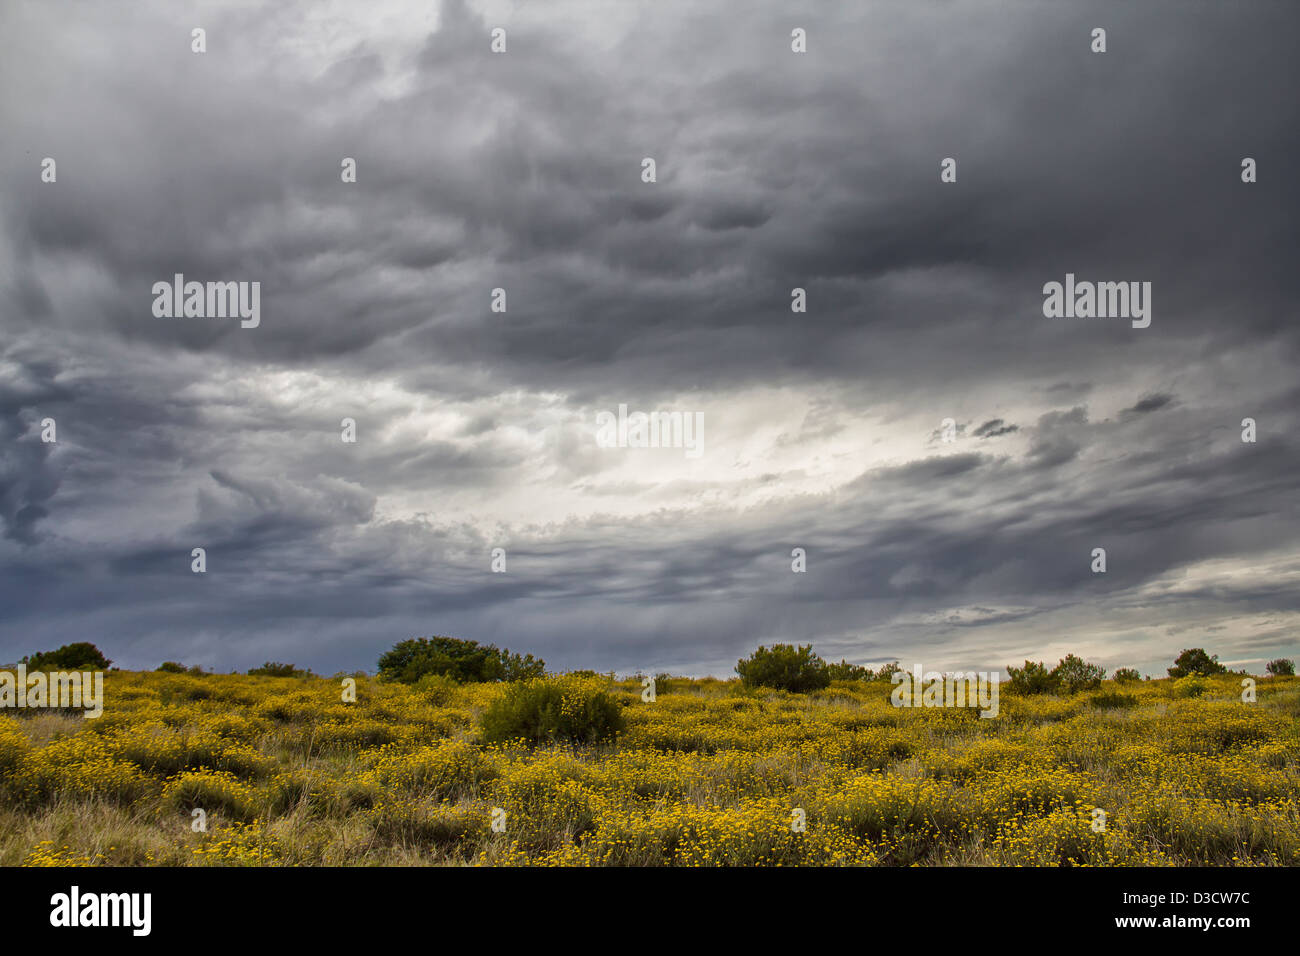 he Southern section of Addo Elephant National Park On a stormy and moody afternoonin South Africa Stock Photo